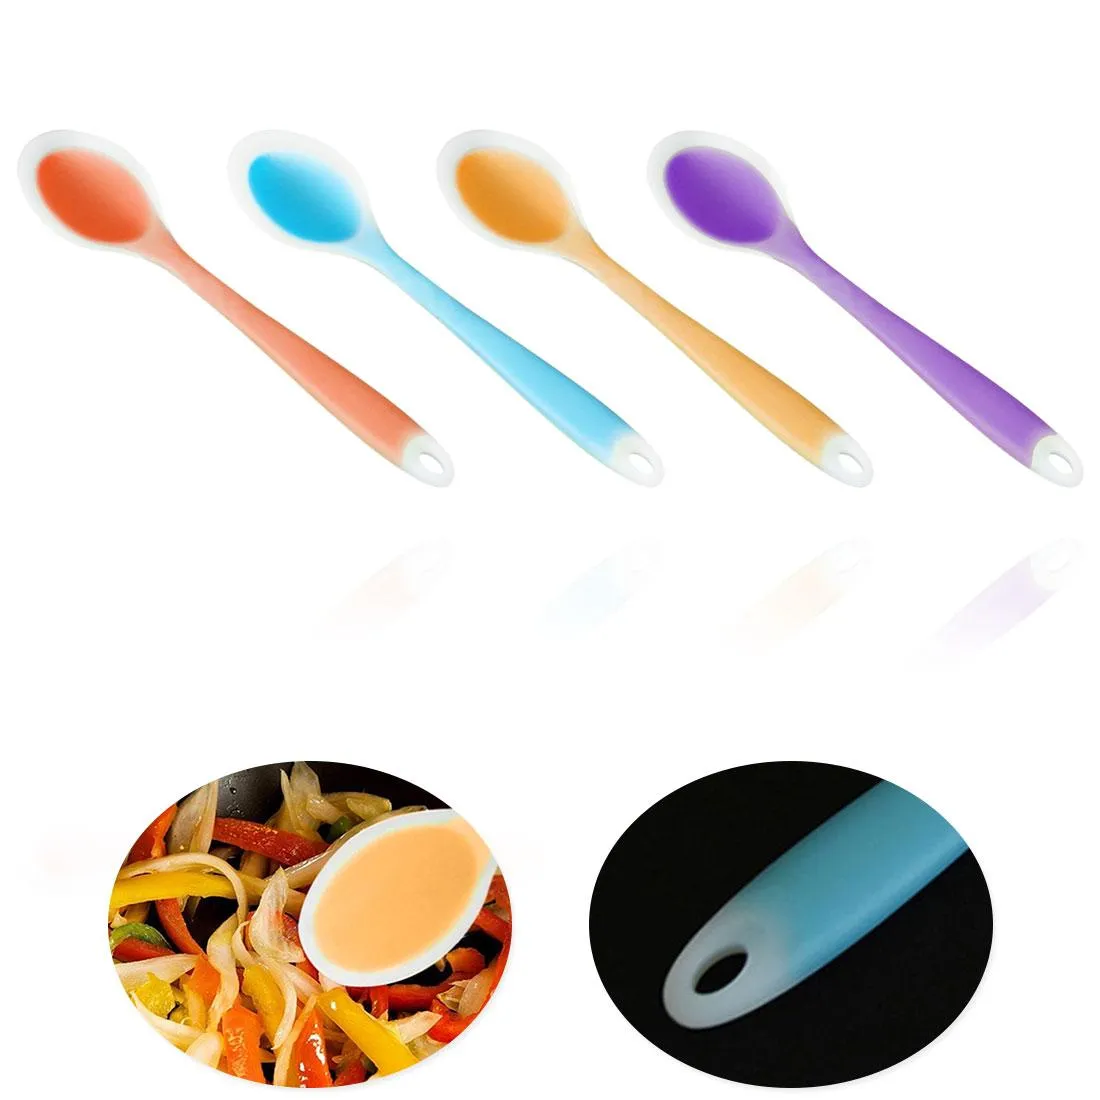 Home Use Mini Silicone Spoon Colorful Heat Resistant Spoons Kitchenware Cooking Tools Utensil 20.5*4.5cm Colorful Heat Resistant